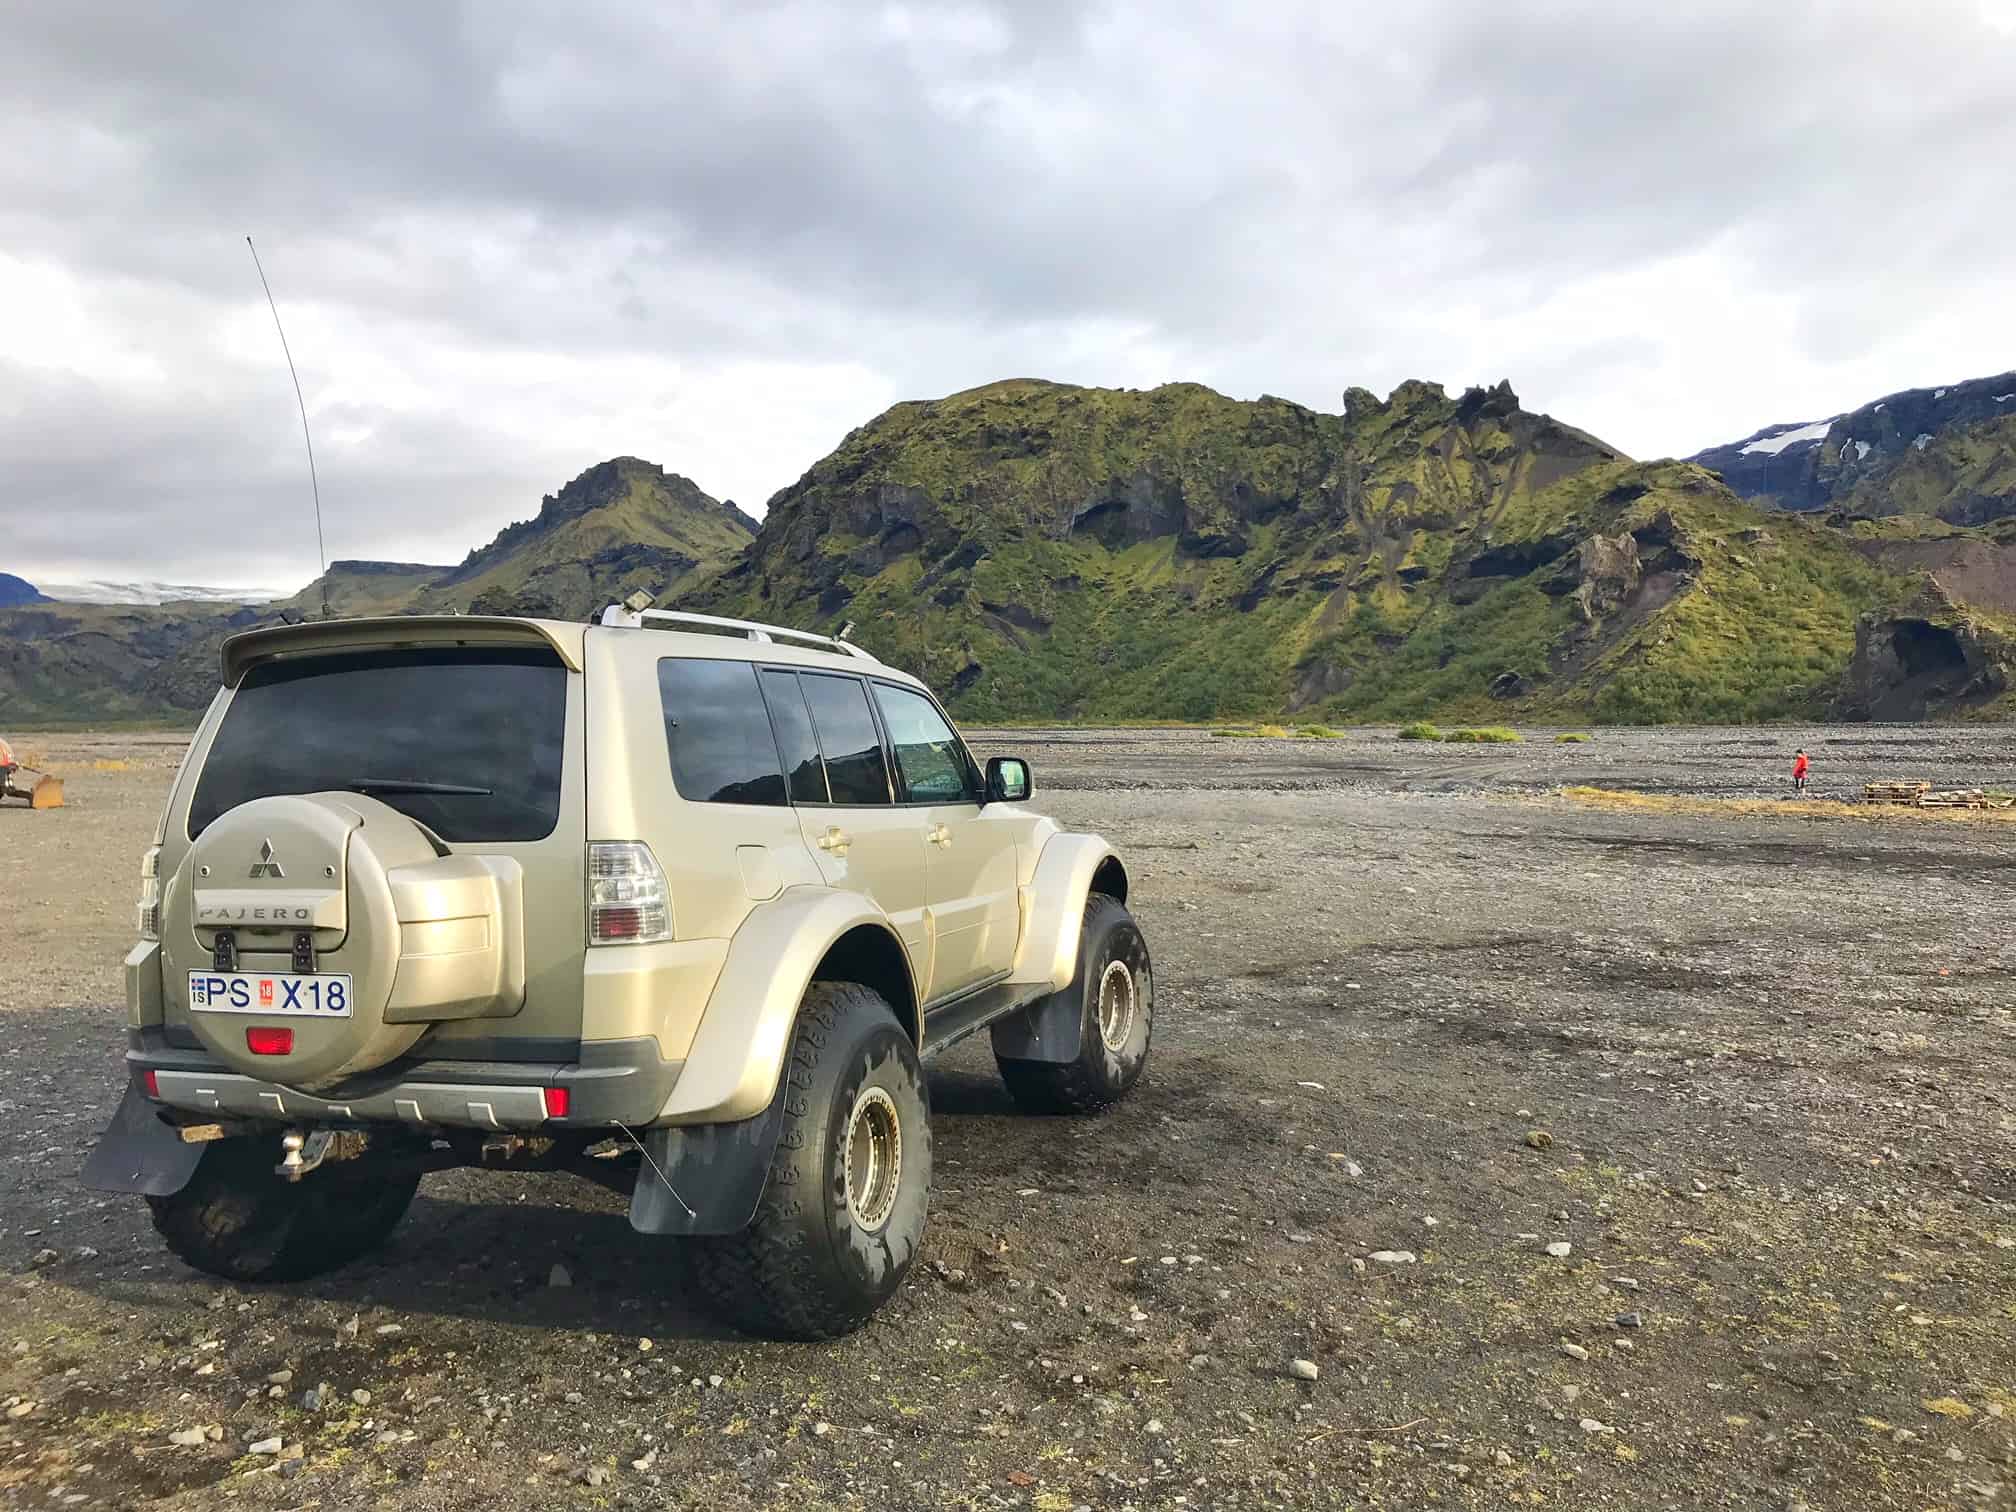 Choosing a private tour in Iceland is a great idea to customize the tour